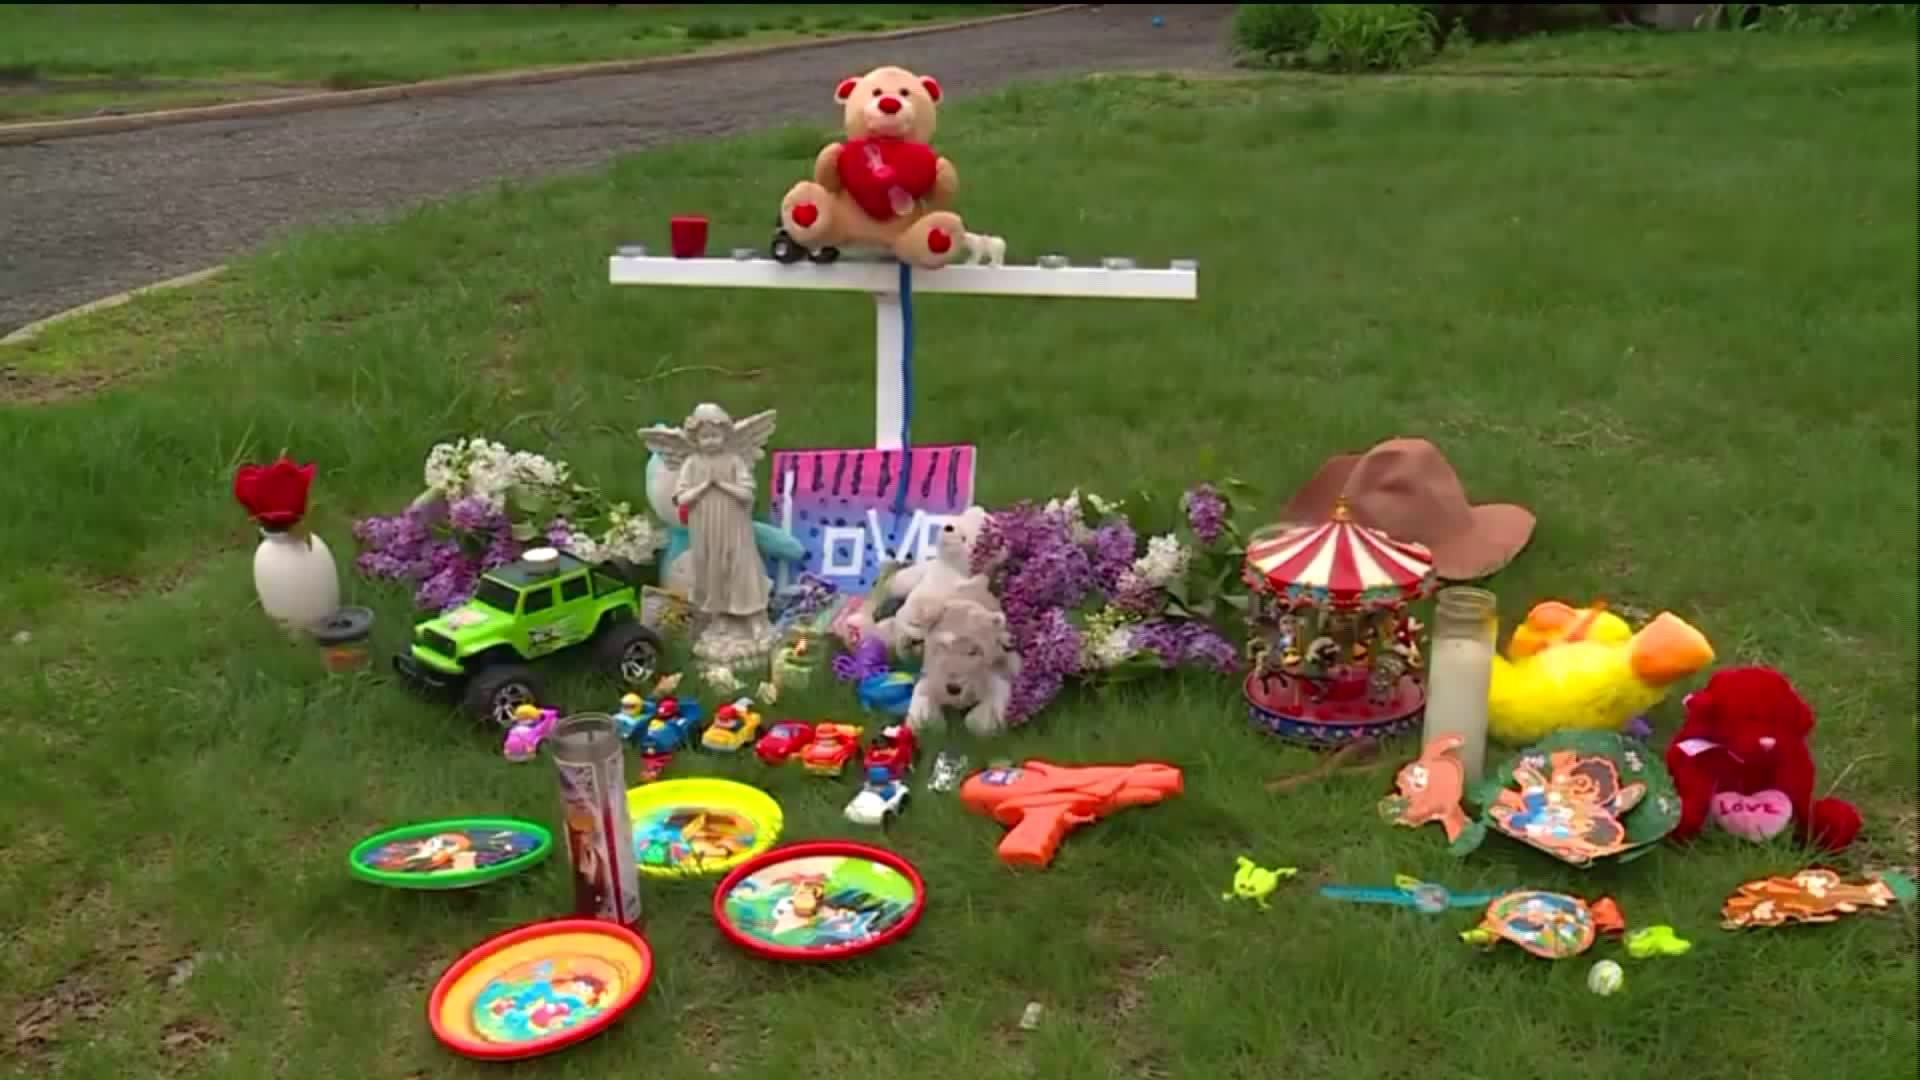 Child hit with vehicle driven by father and killed